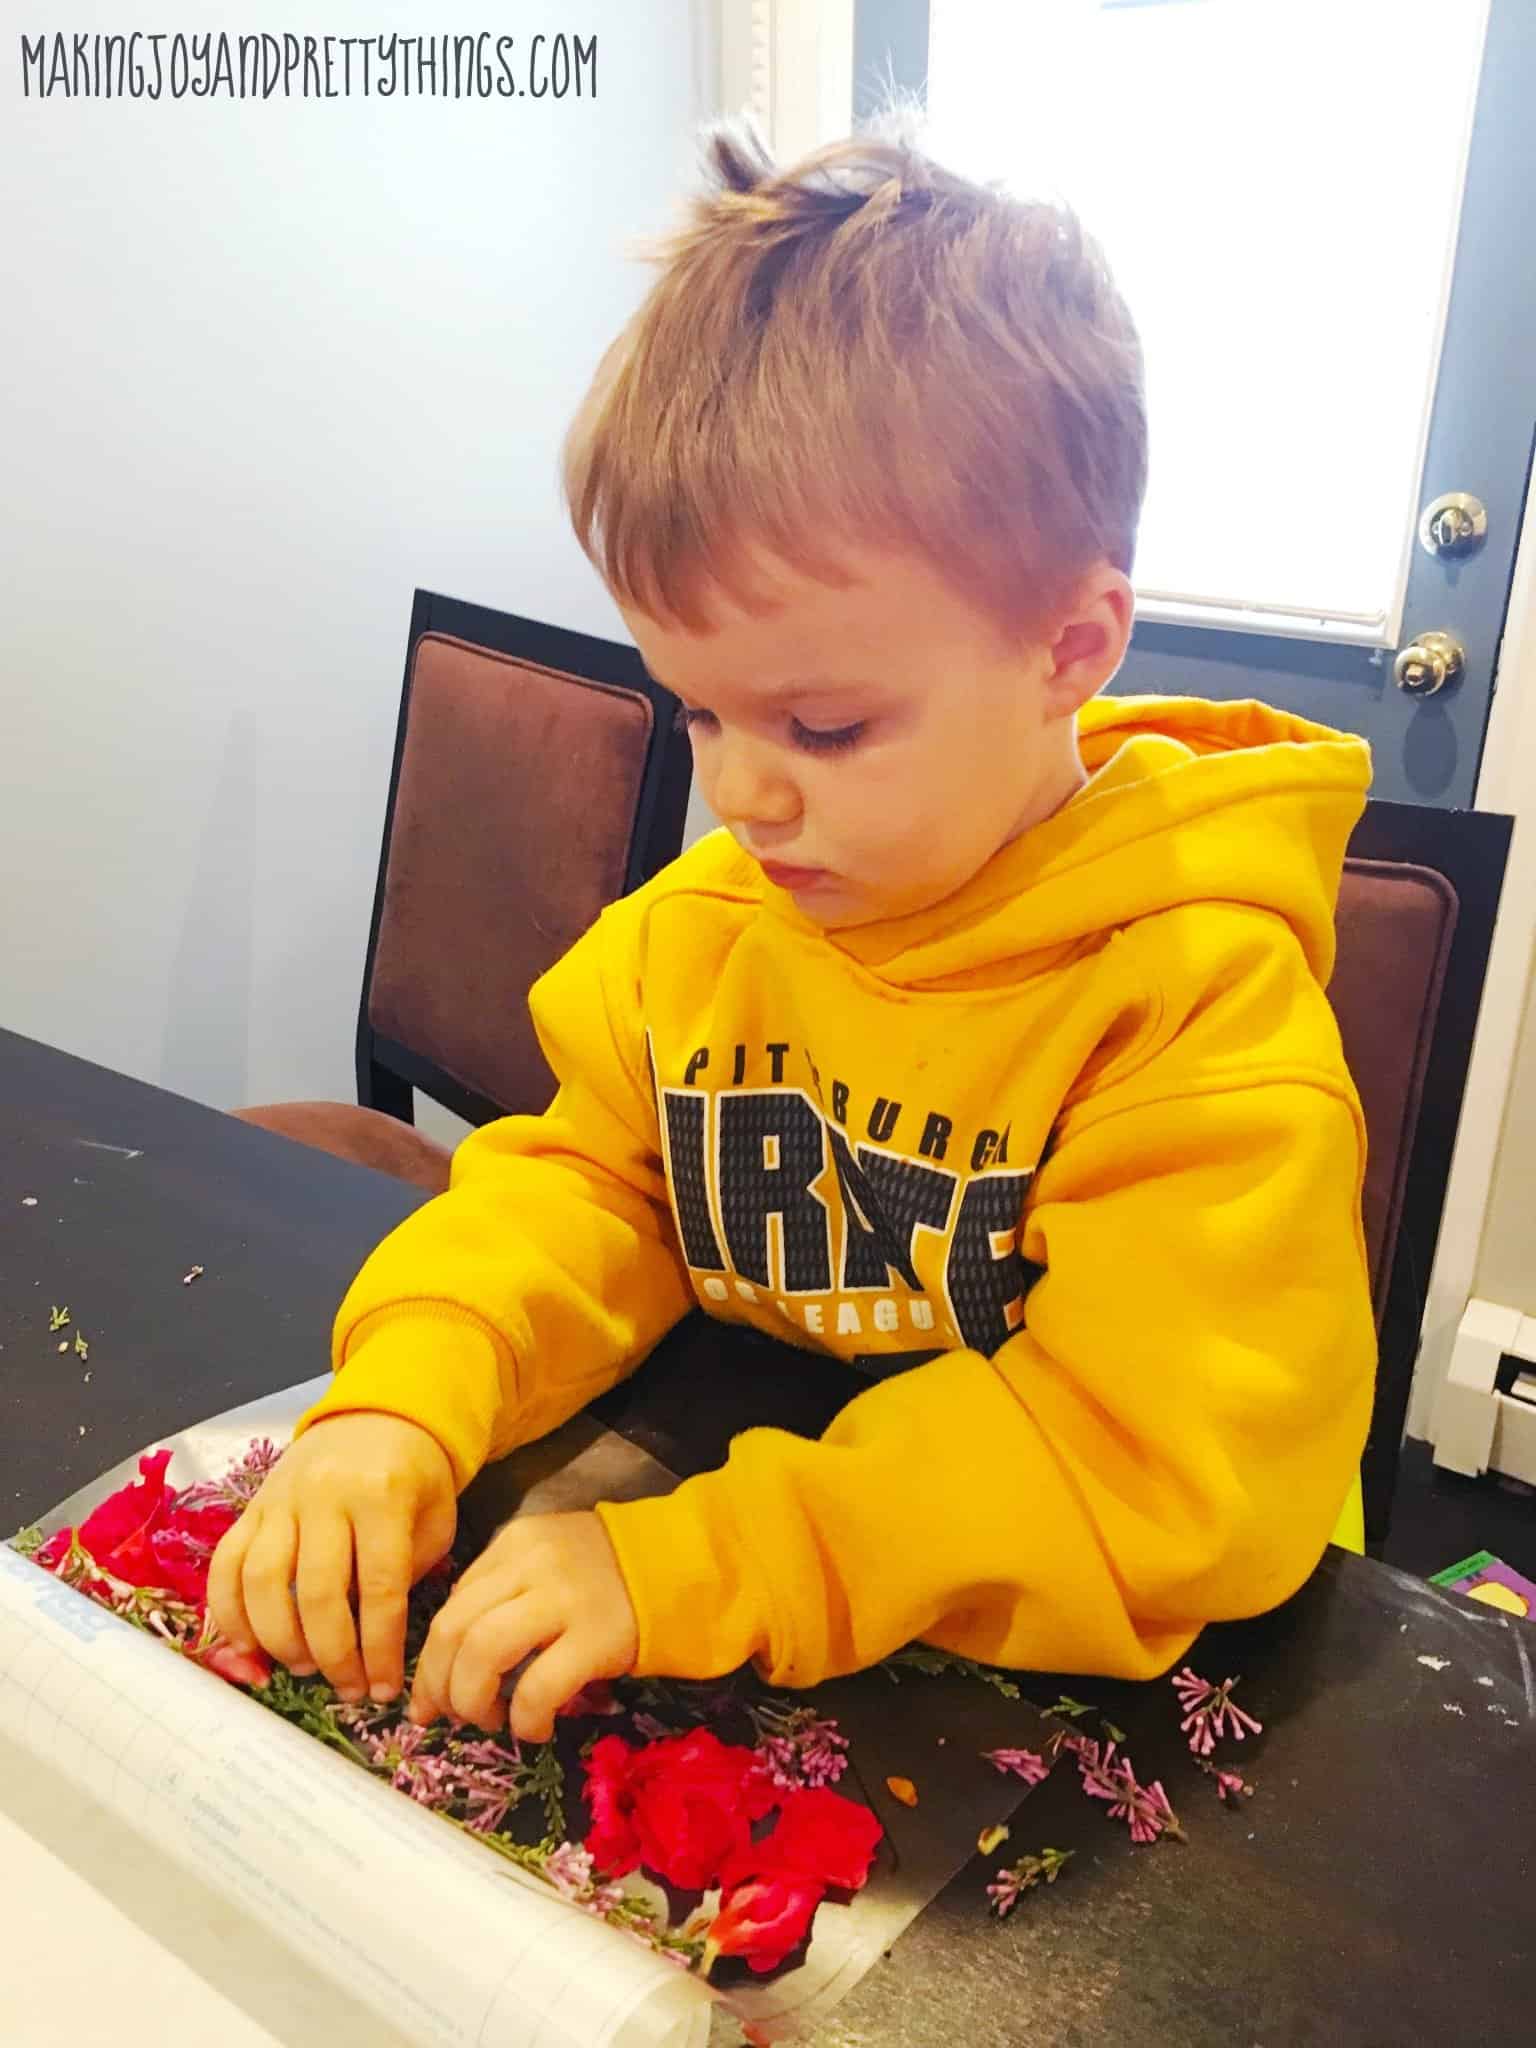 A little boy wearing a yellow hoodie concentrates on placing pink and purple flower petals onto a sheet of contact paper to make pressed flower suncatchers.